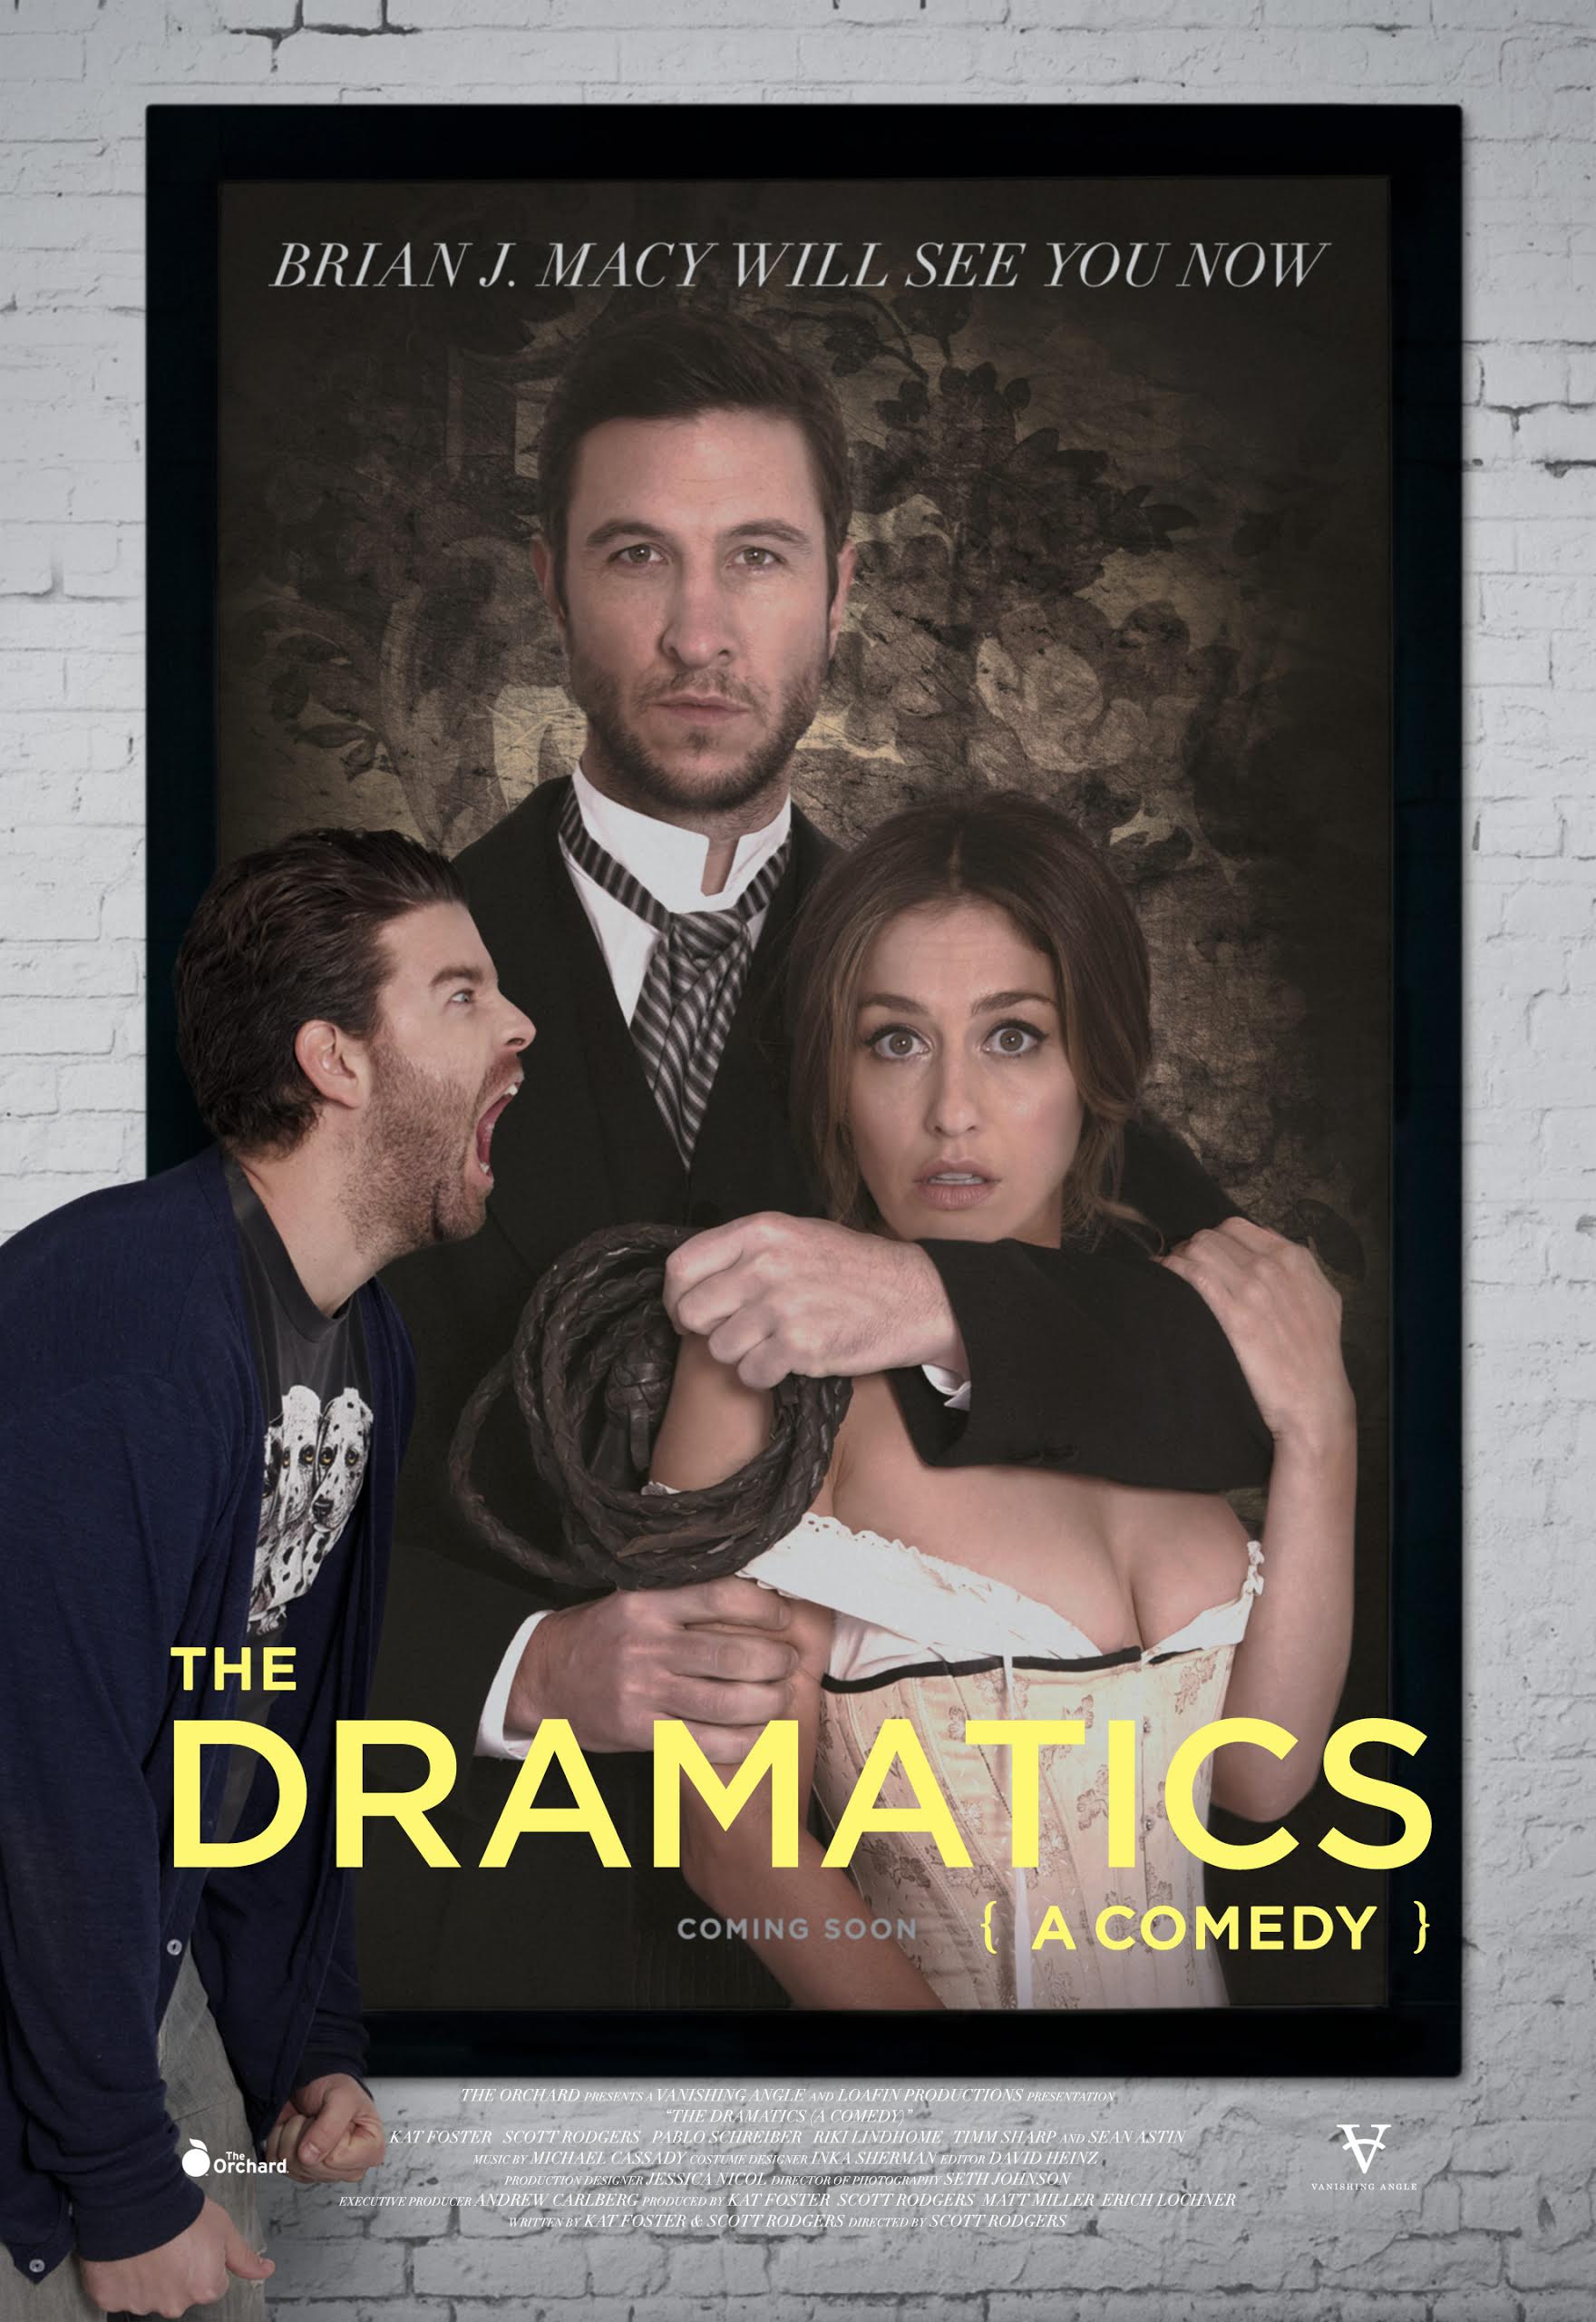 Pablo Schreiber, Kat Foster and Scott Rodgers in The Dramatics: A Comedy (2015)